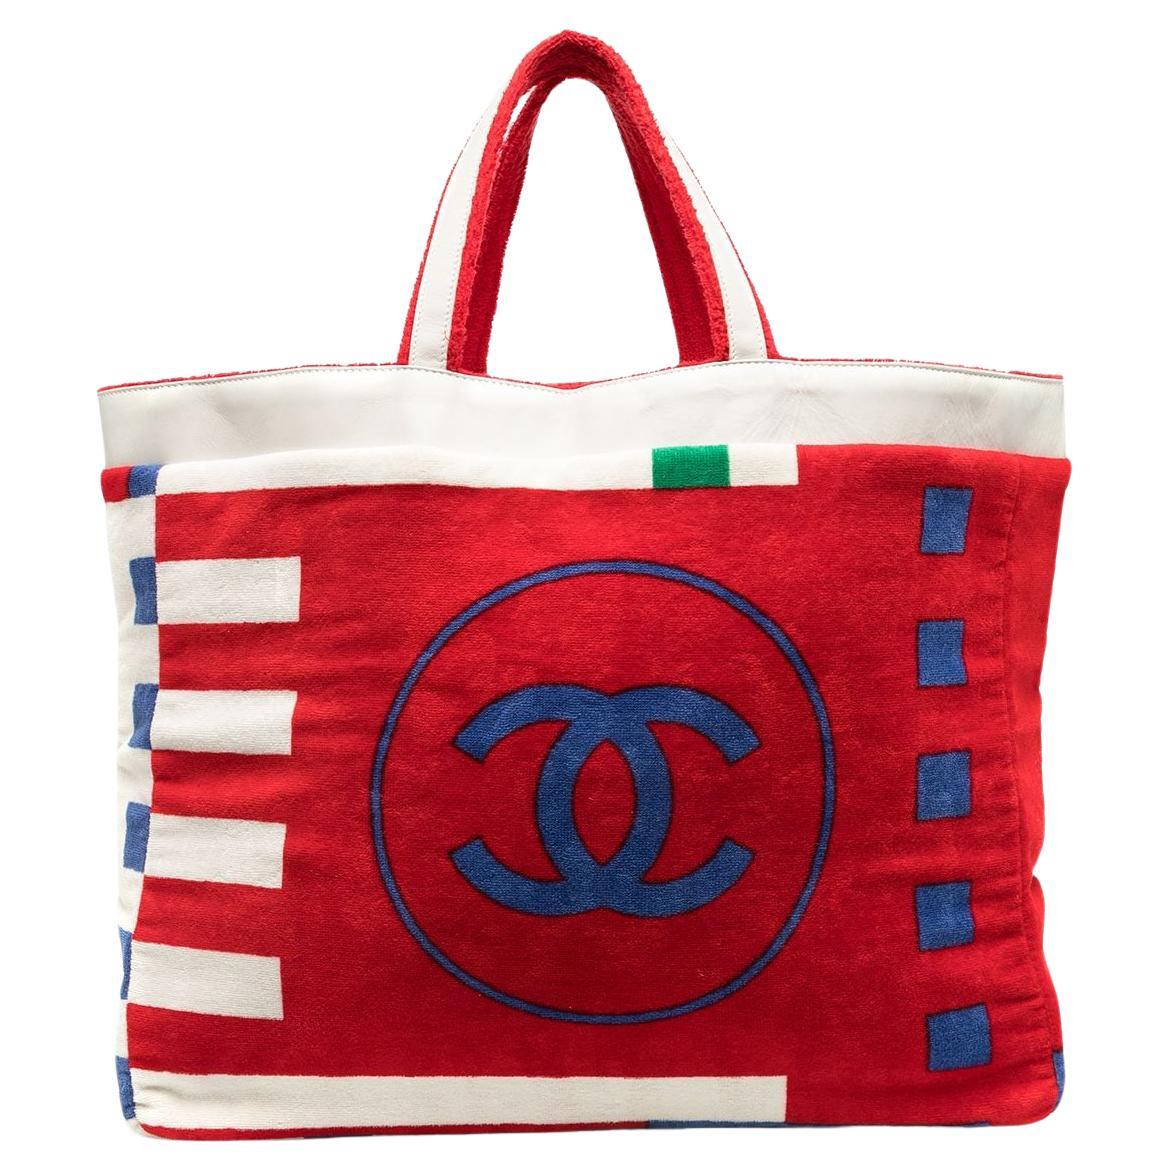 Chanel Terry - 53 For Sale on 1stDibs  chanel terry bag, chanel terry tote,  chanel terry cloth tote